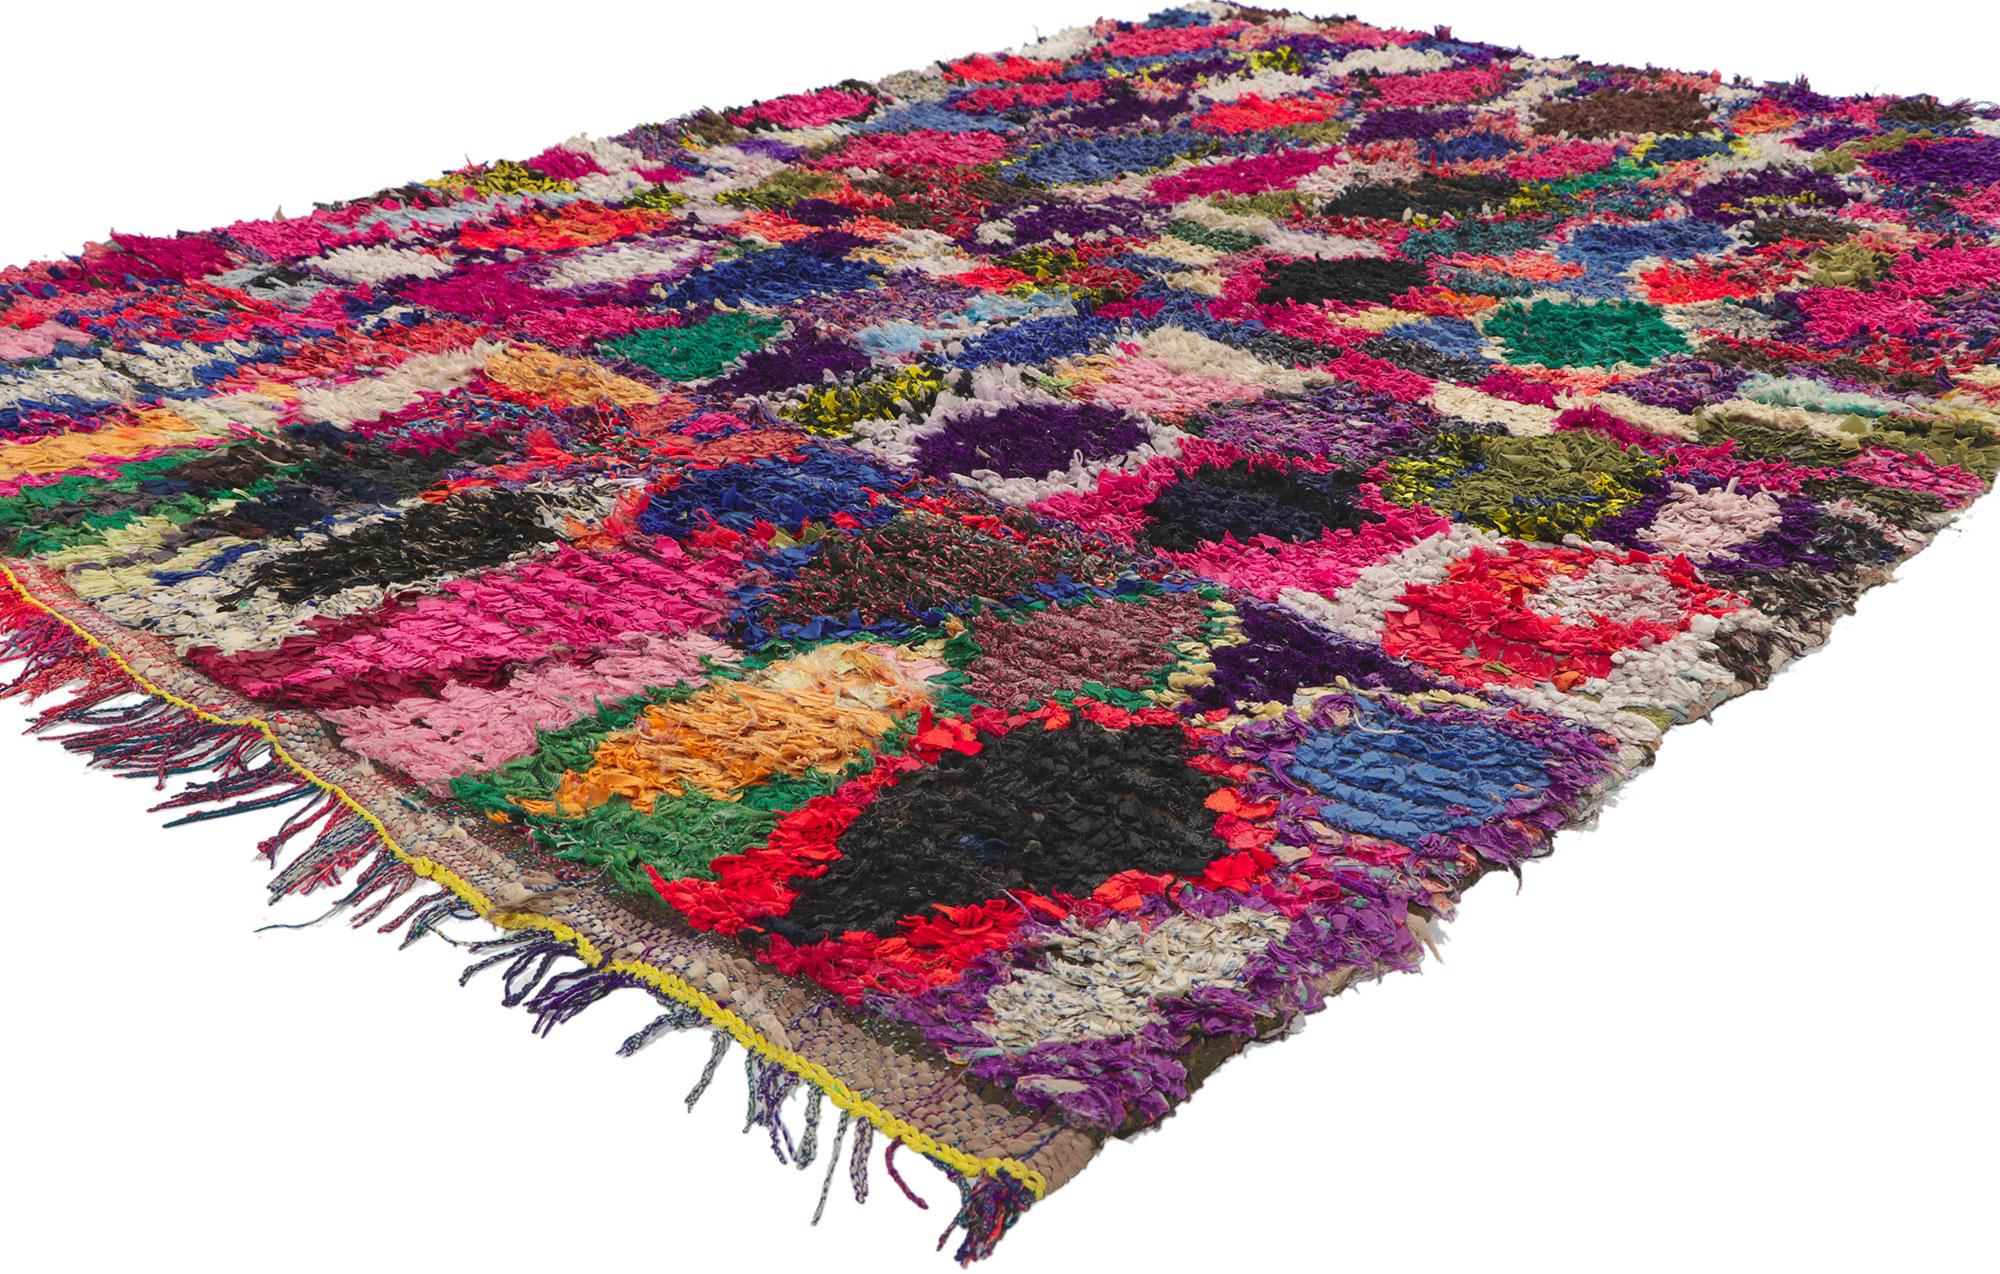 78399 Vintage Moroccan Rag rug, Berber Boucherouite 04'08 x 06'09. With its nomadic charm, incredible detail and texture, this hand knotted vintage Moroccan rag rug is a captivating vision of woven beauty. The eye-catching geometric design and